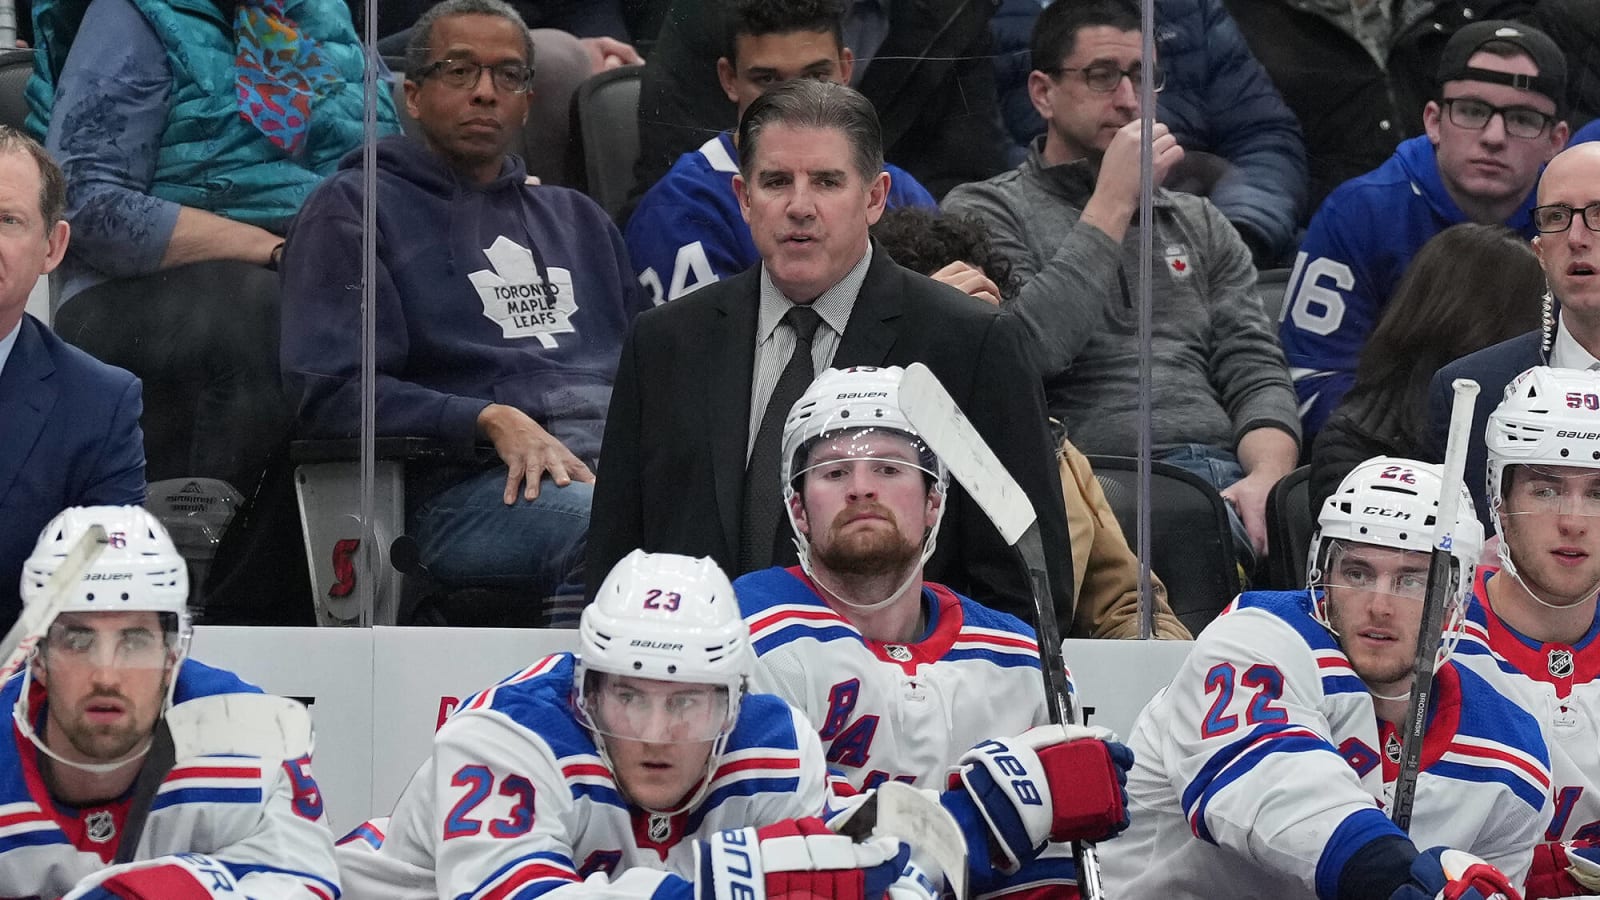 Rangers Need to Balance Push for No. 1 Seed With Player Rest